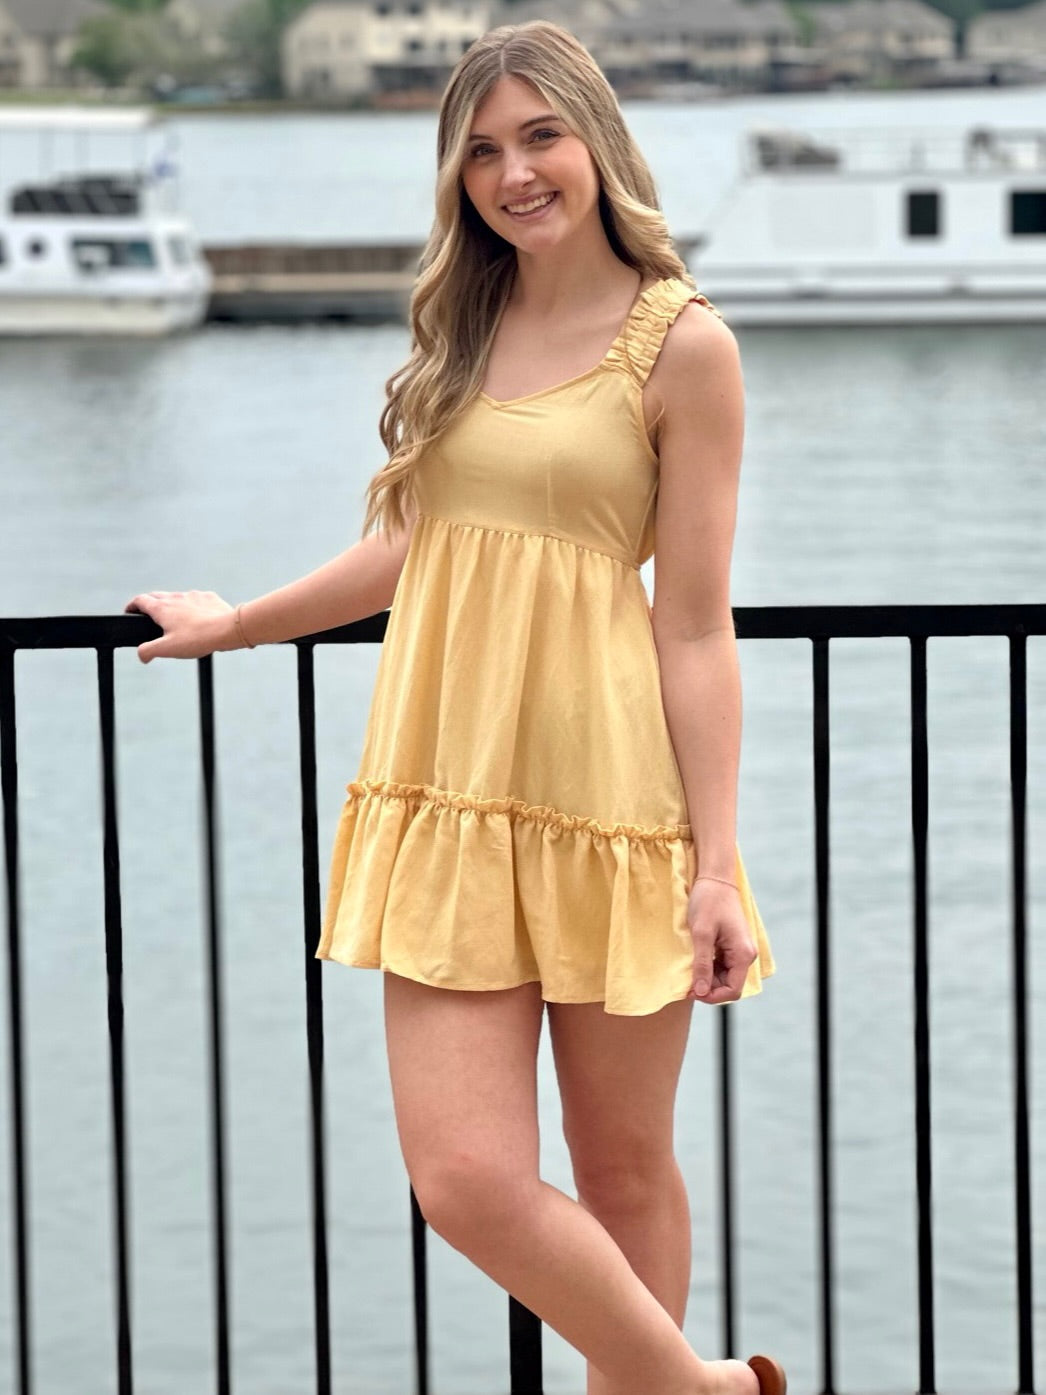 Lexi in yellow dress smiling holding dress